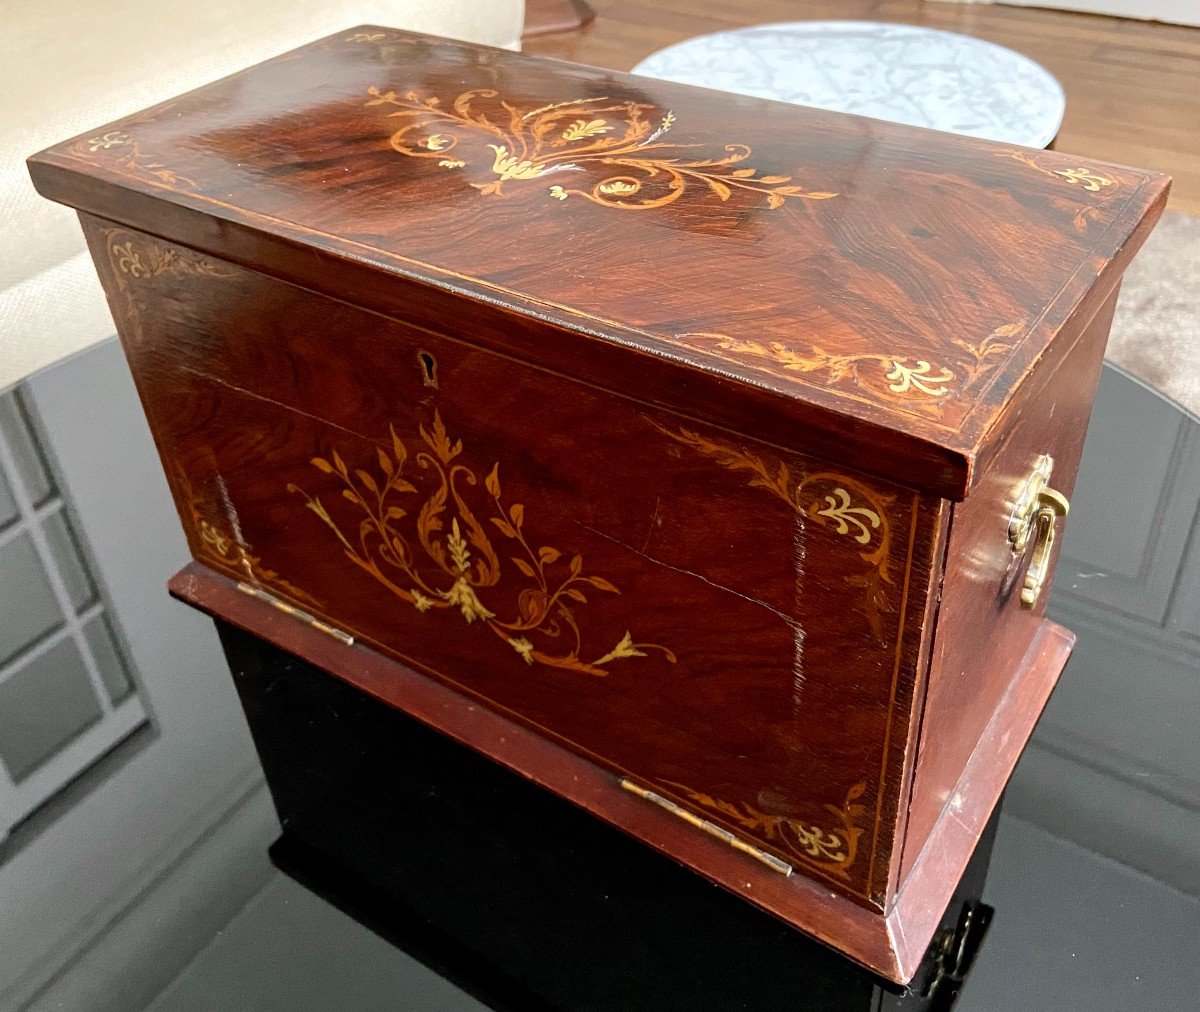 France Or Italy, Years 1930/1950, Inlaid Wood Writing Box.